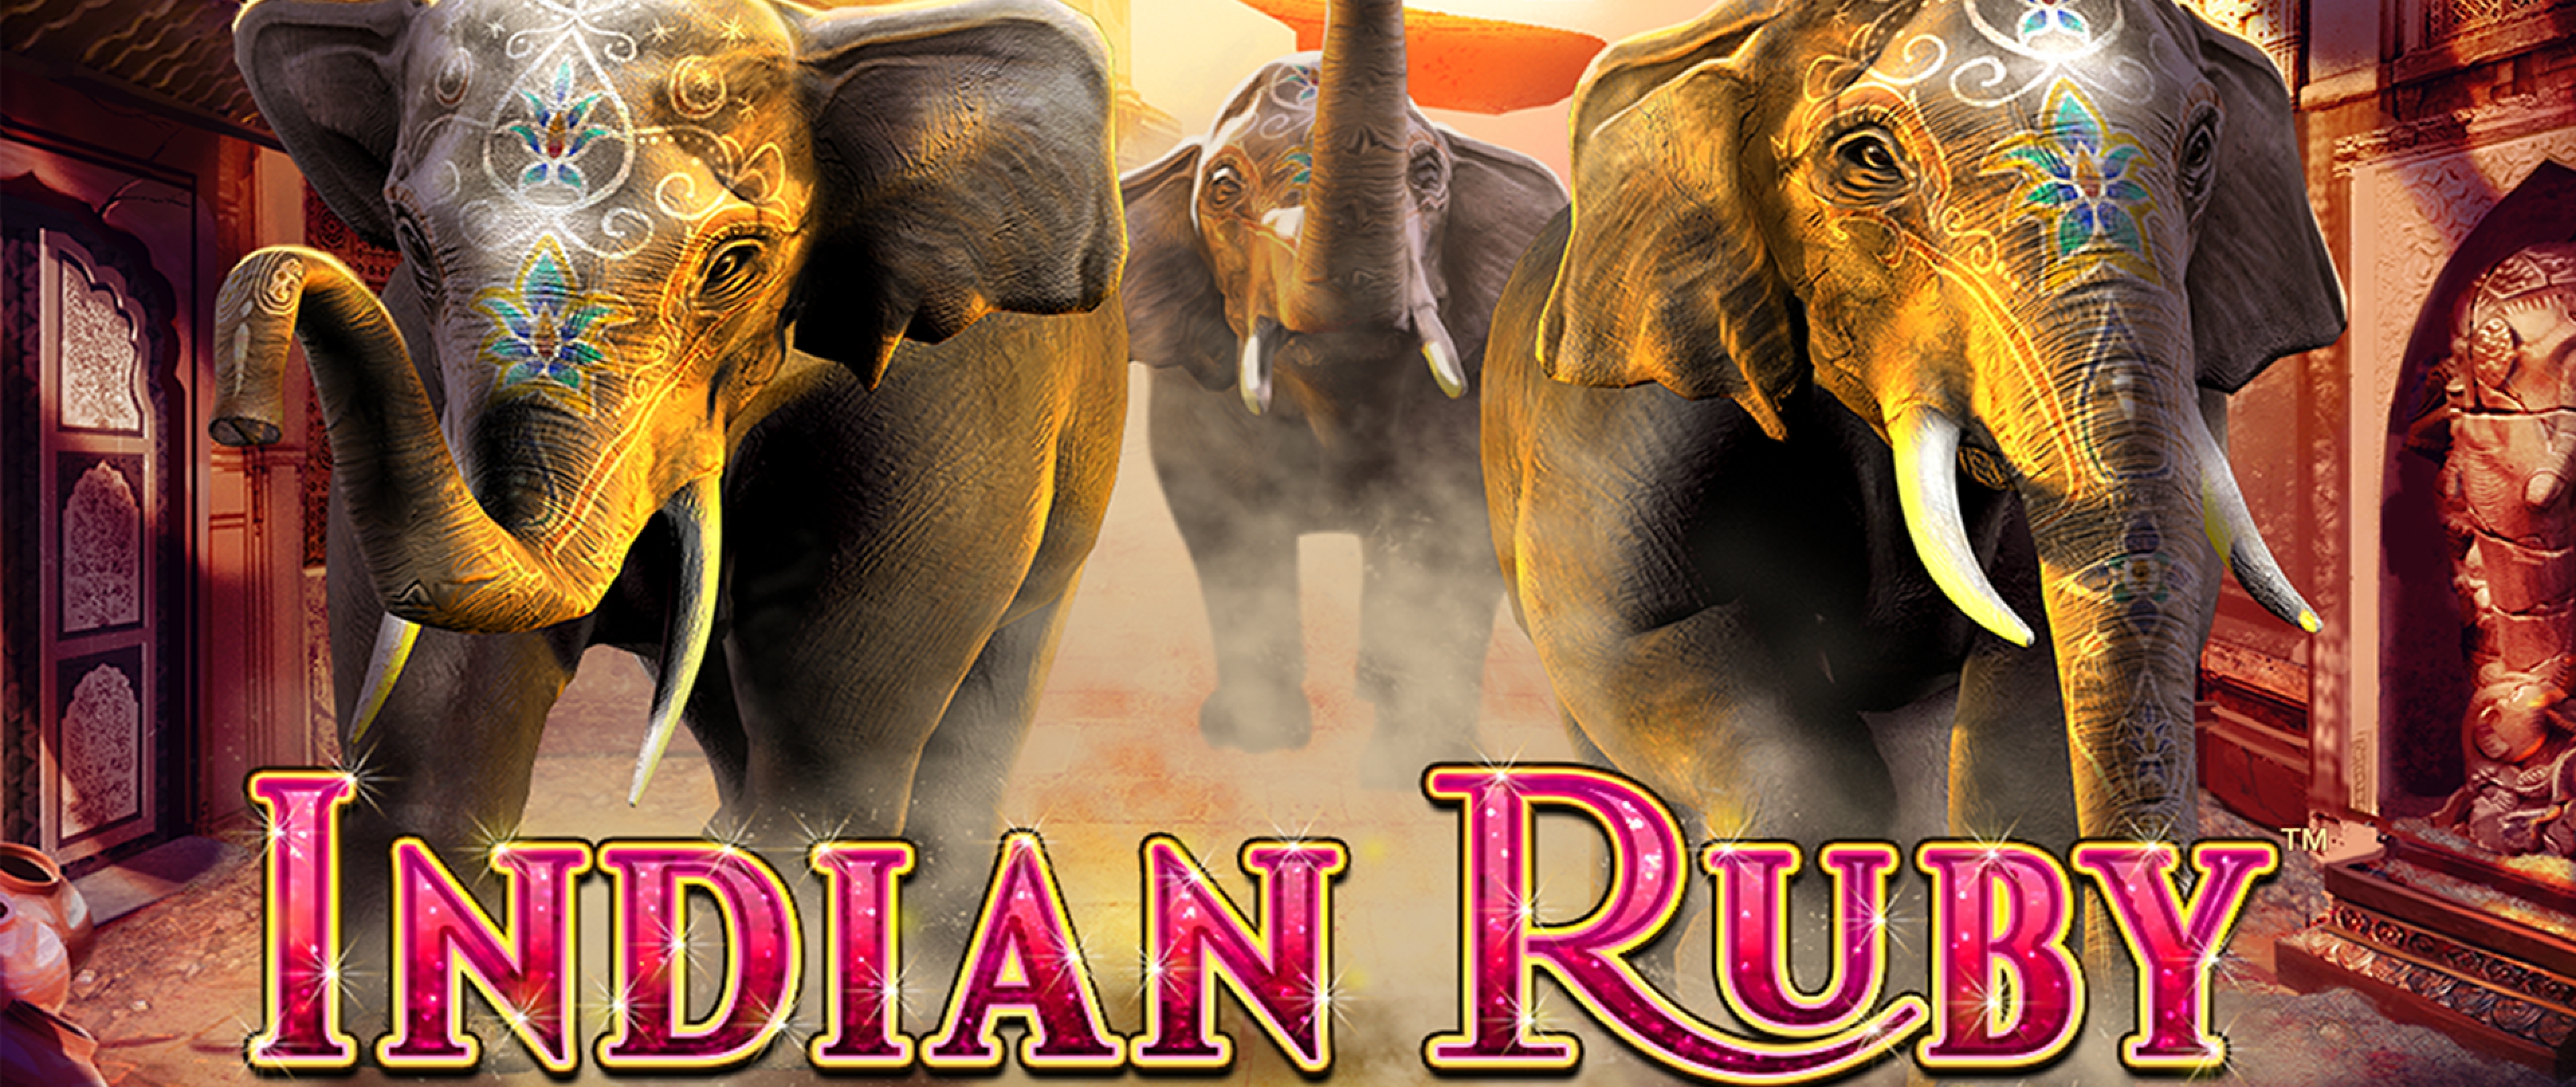 The Indian Ruby Online Slot Demo Game by Merkur Gaming